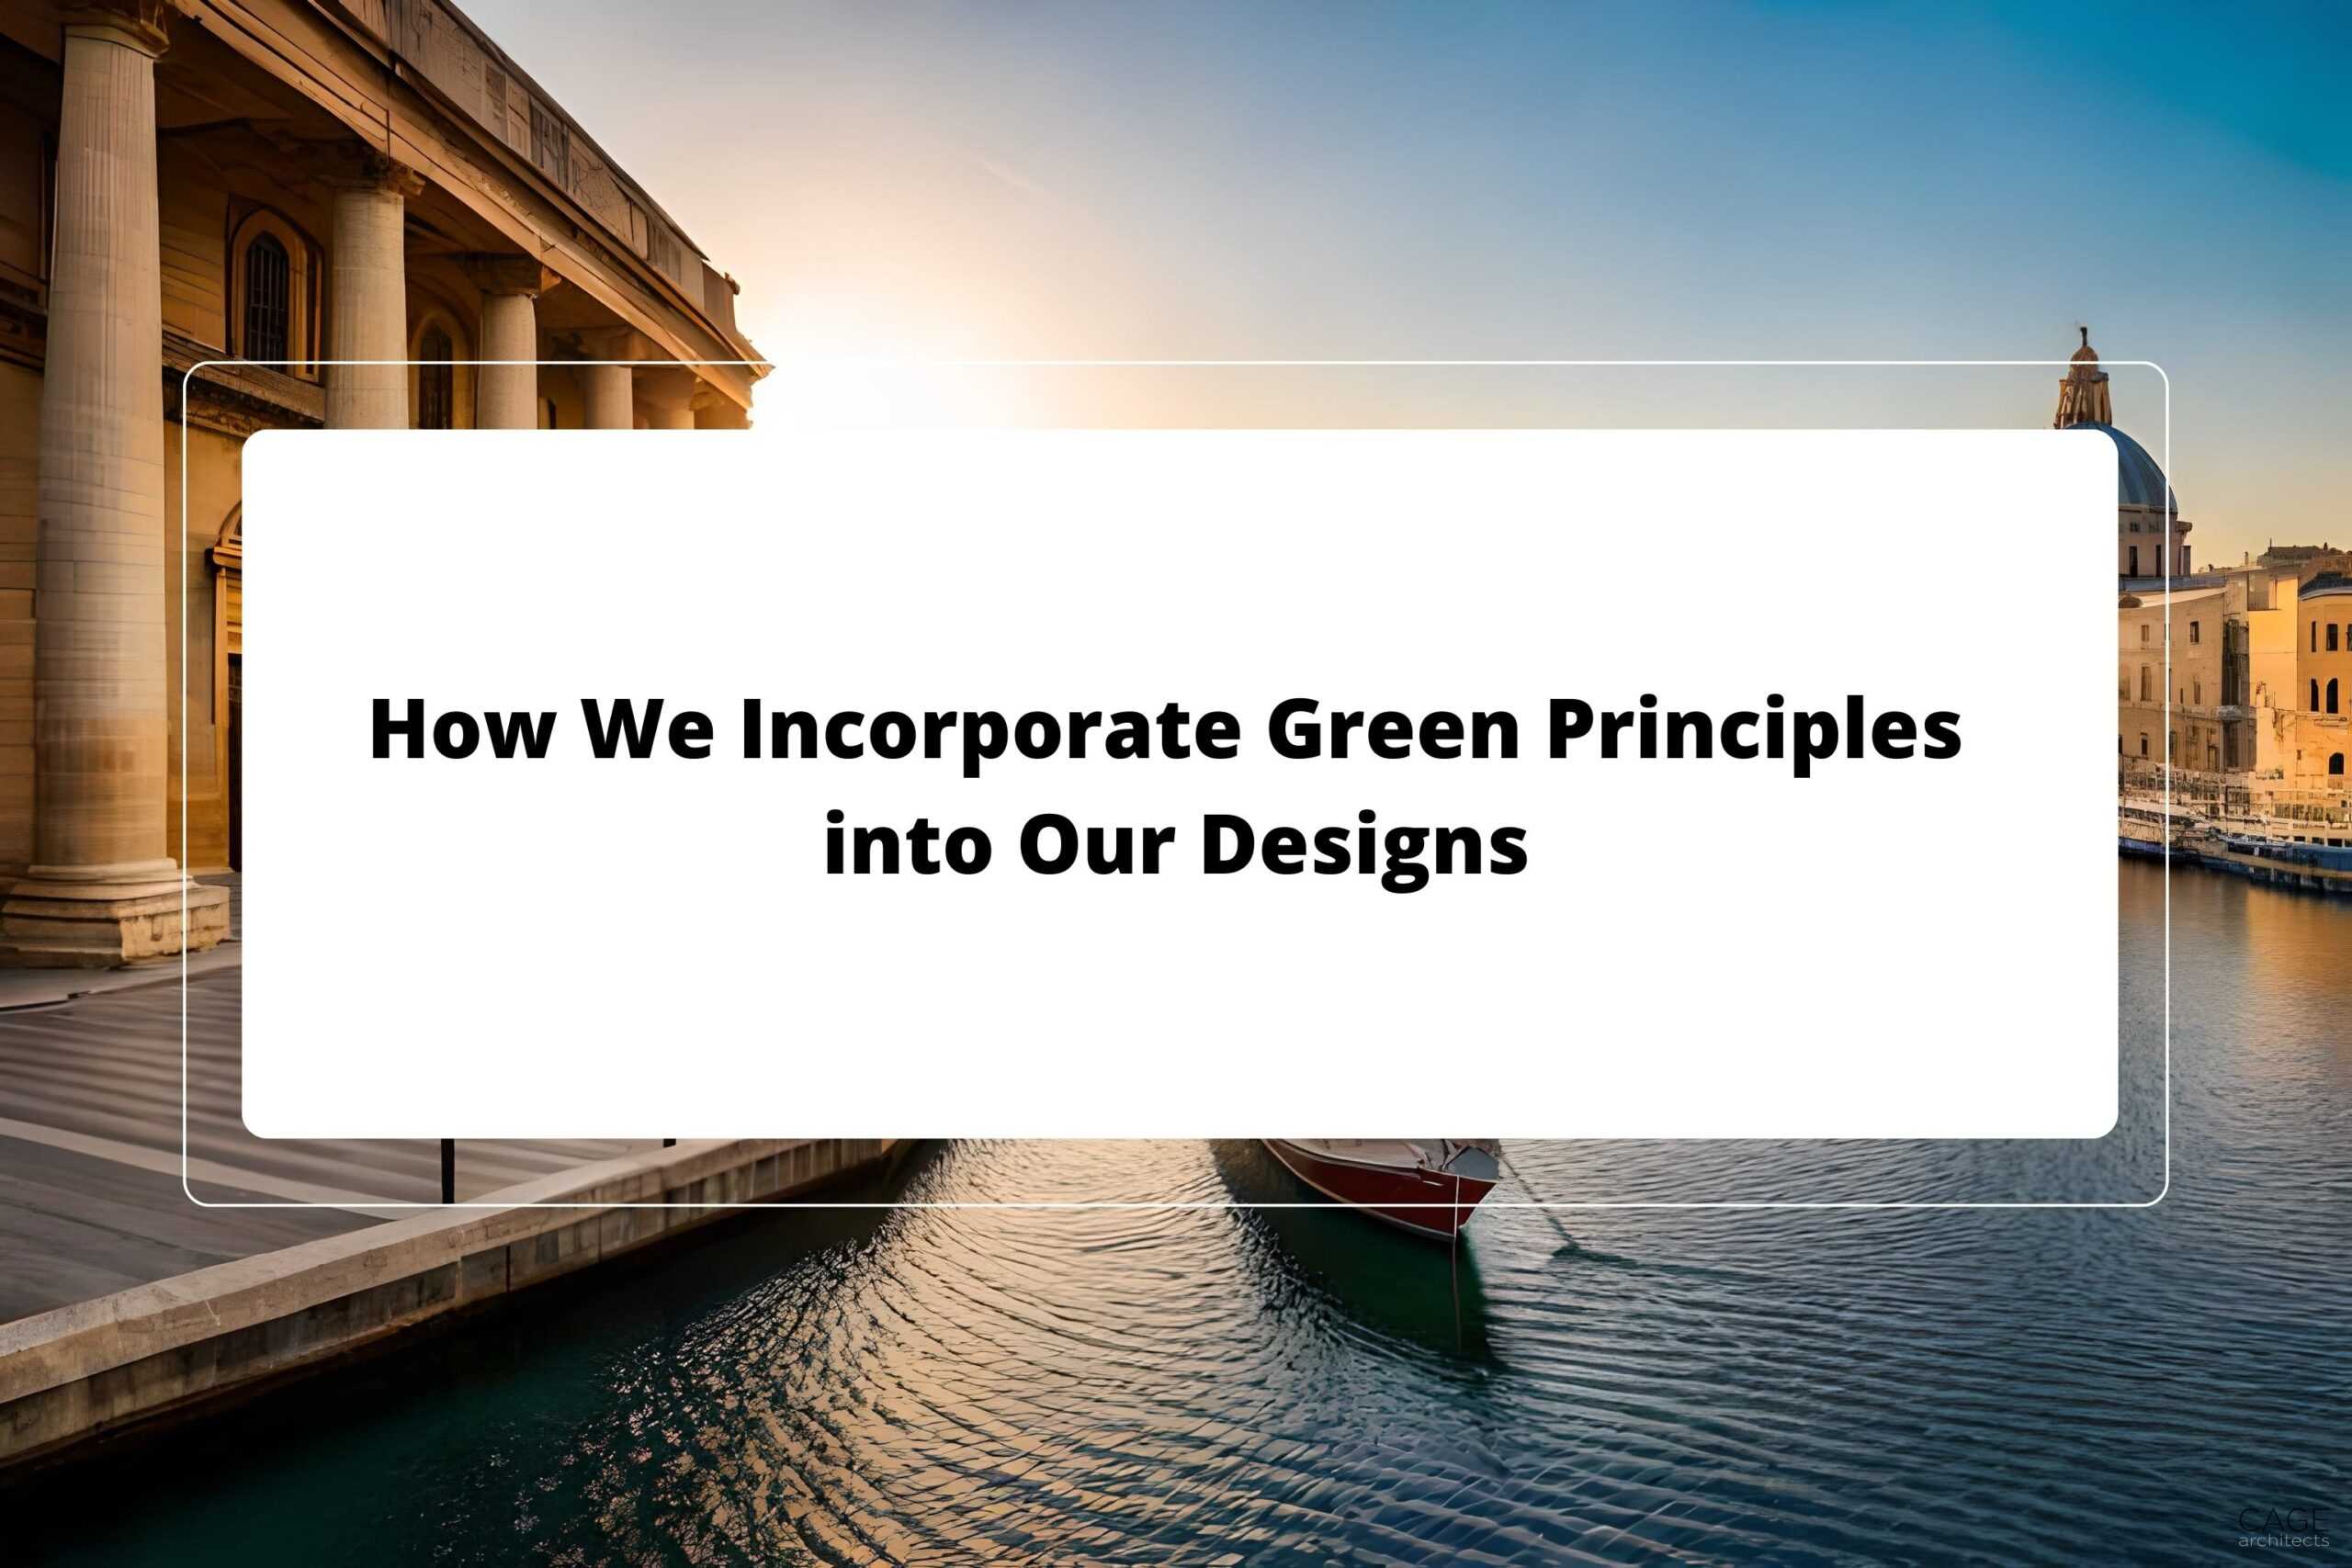 Sustainable Architecture in Malta: How We Incorporate Green Principles into Our Designs